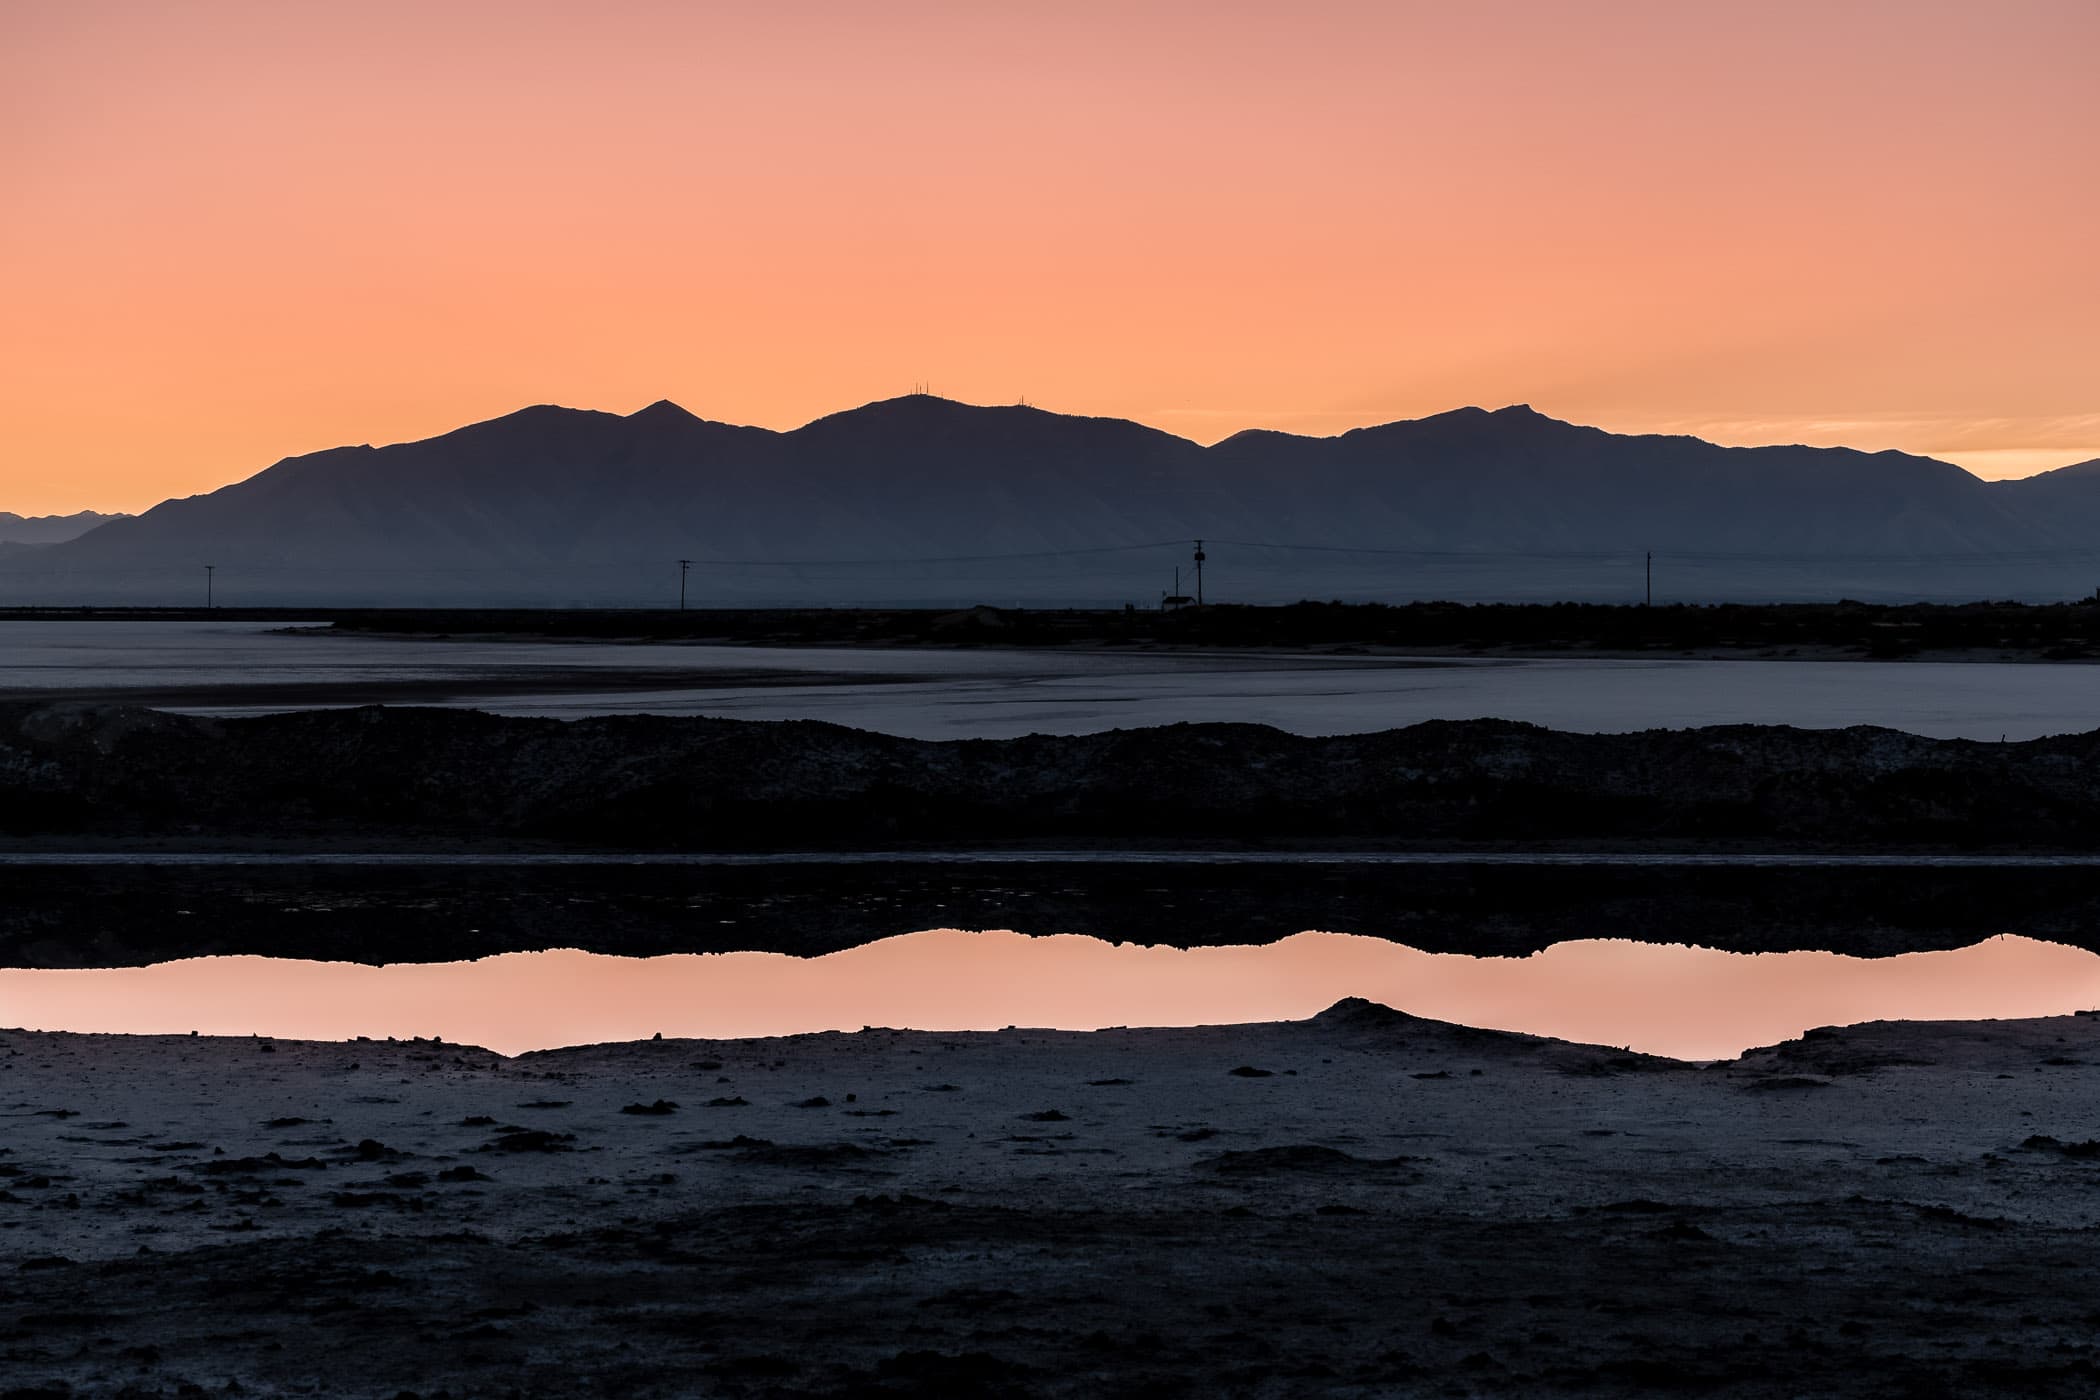 The first light of the morning sun reflects in the still waters of a roadside wash near the Great Salt Lake's Stansbury Island, Utah.